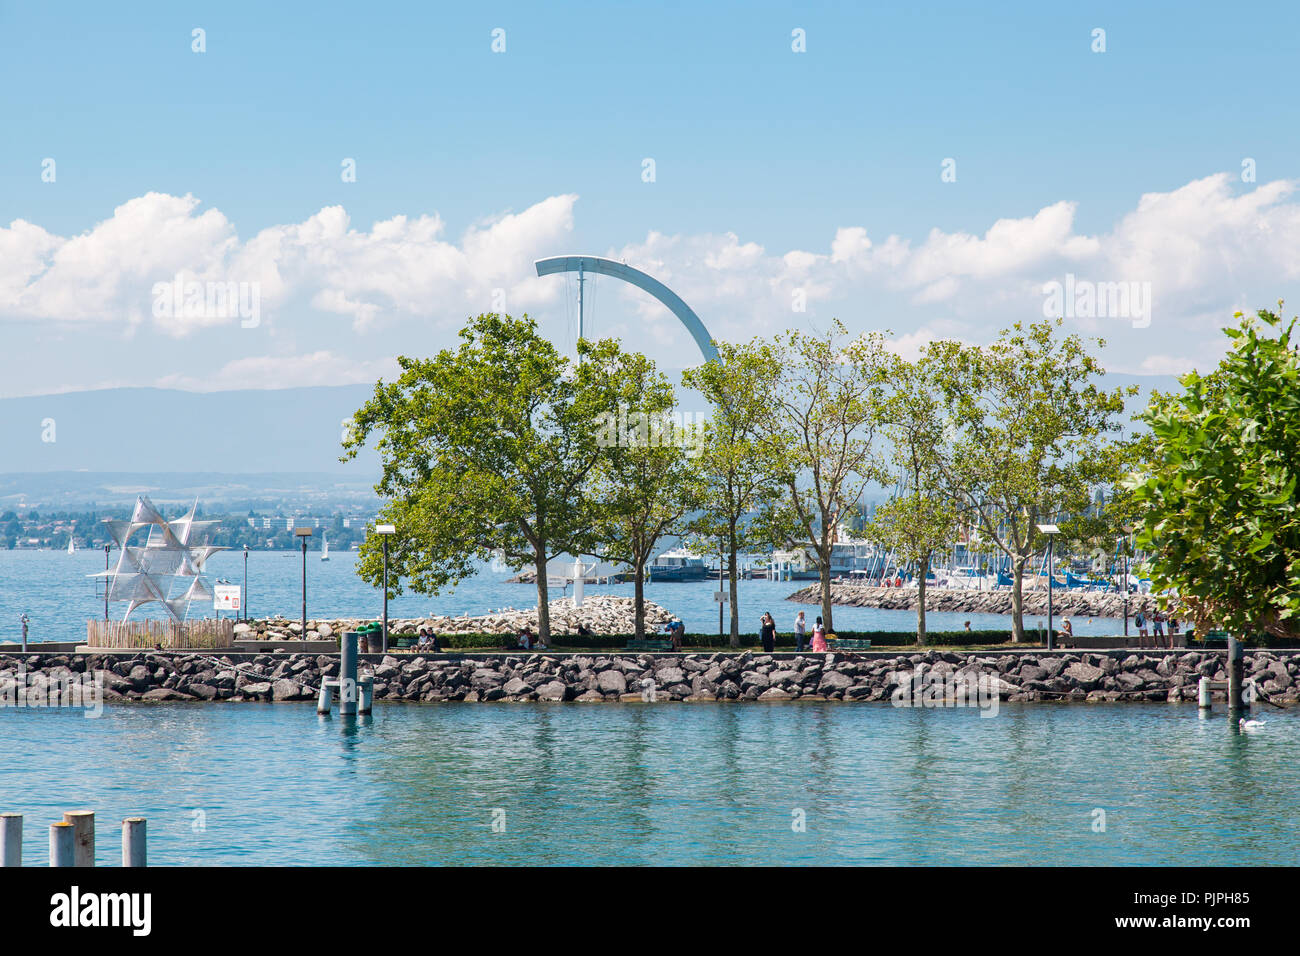 View of Lausanne Ouchy port, Switzerland on Lake Leman (Geneva Lake) on sunny summer day with blue sky and white clouds Stock Photo